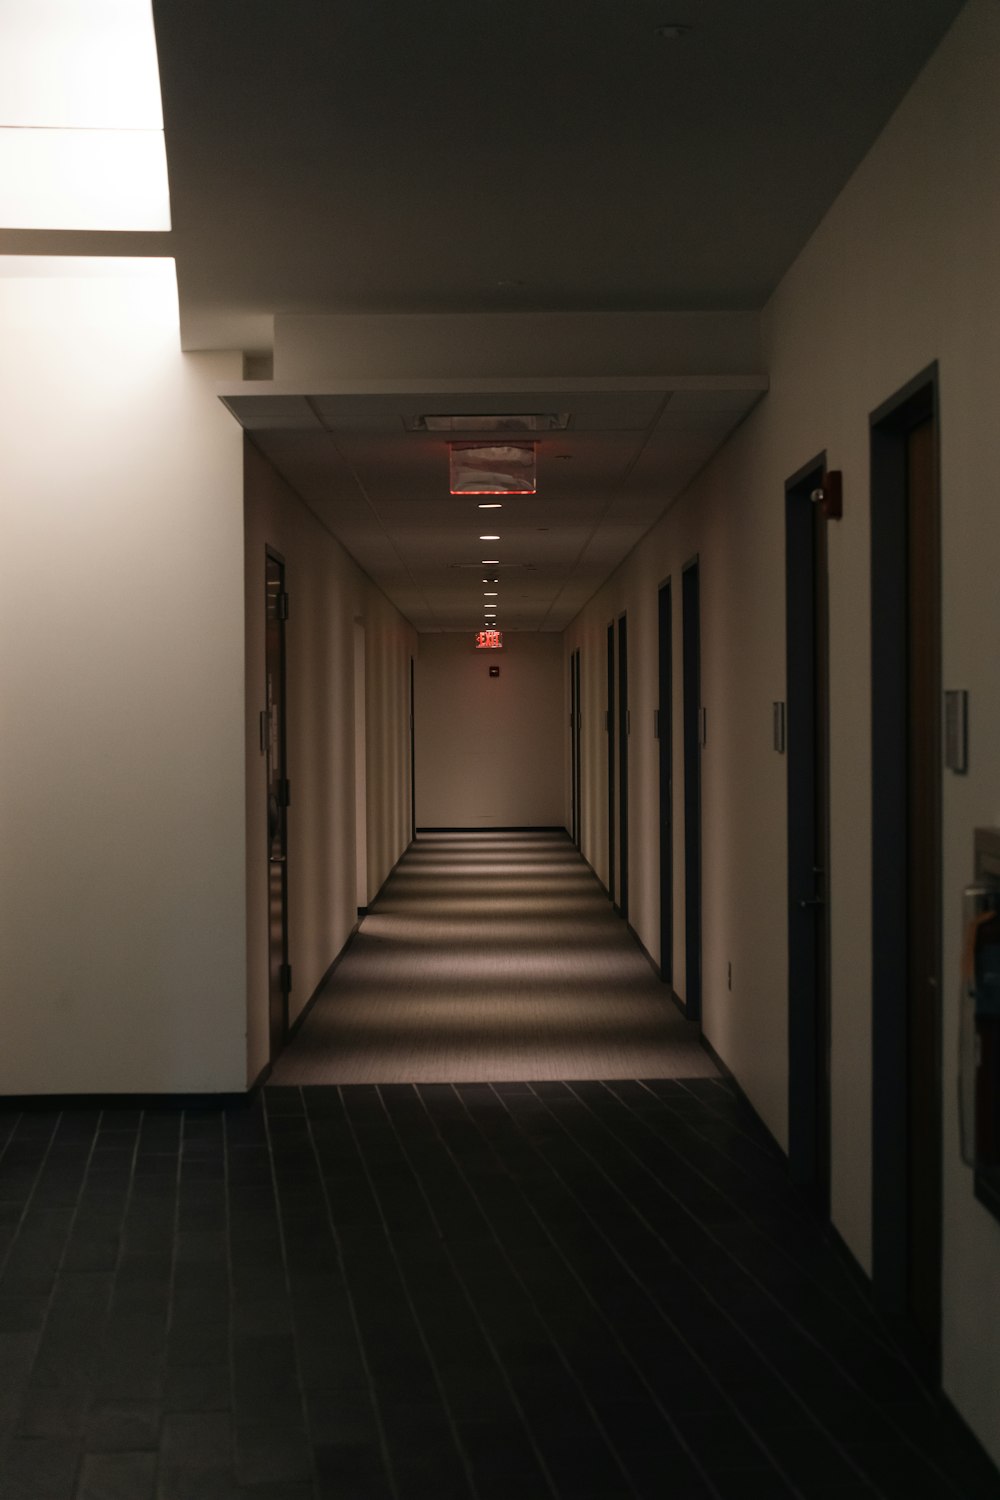 a long hallway with a red light on the ceiling